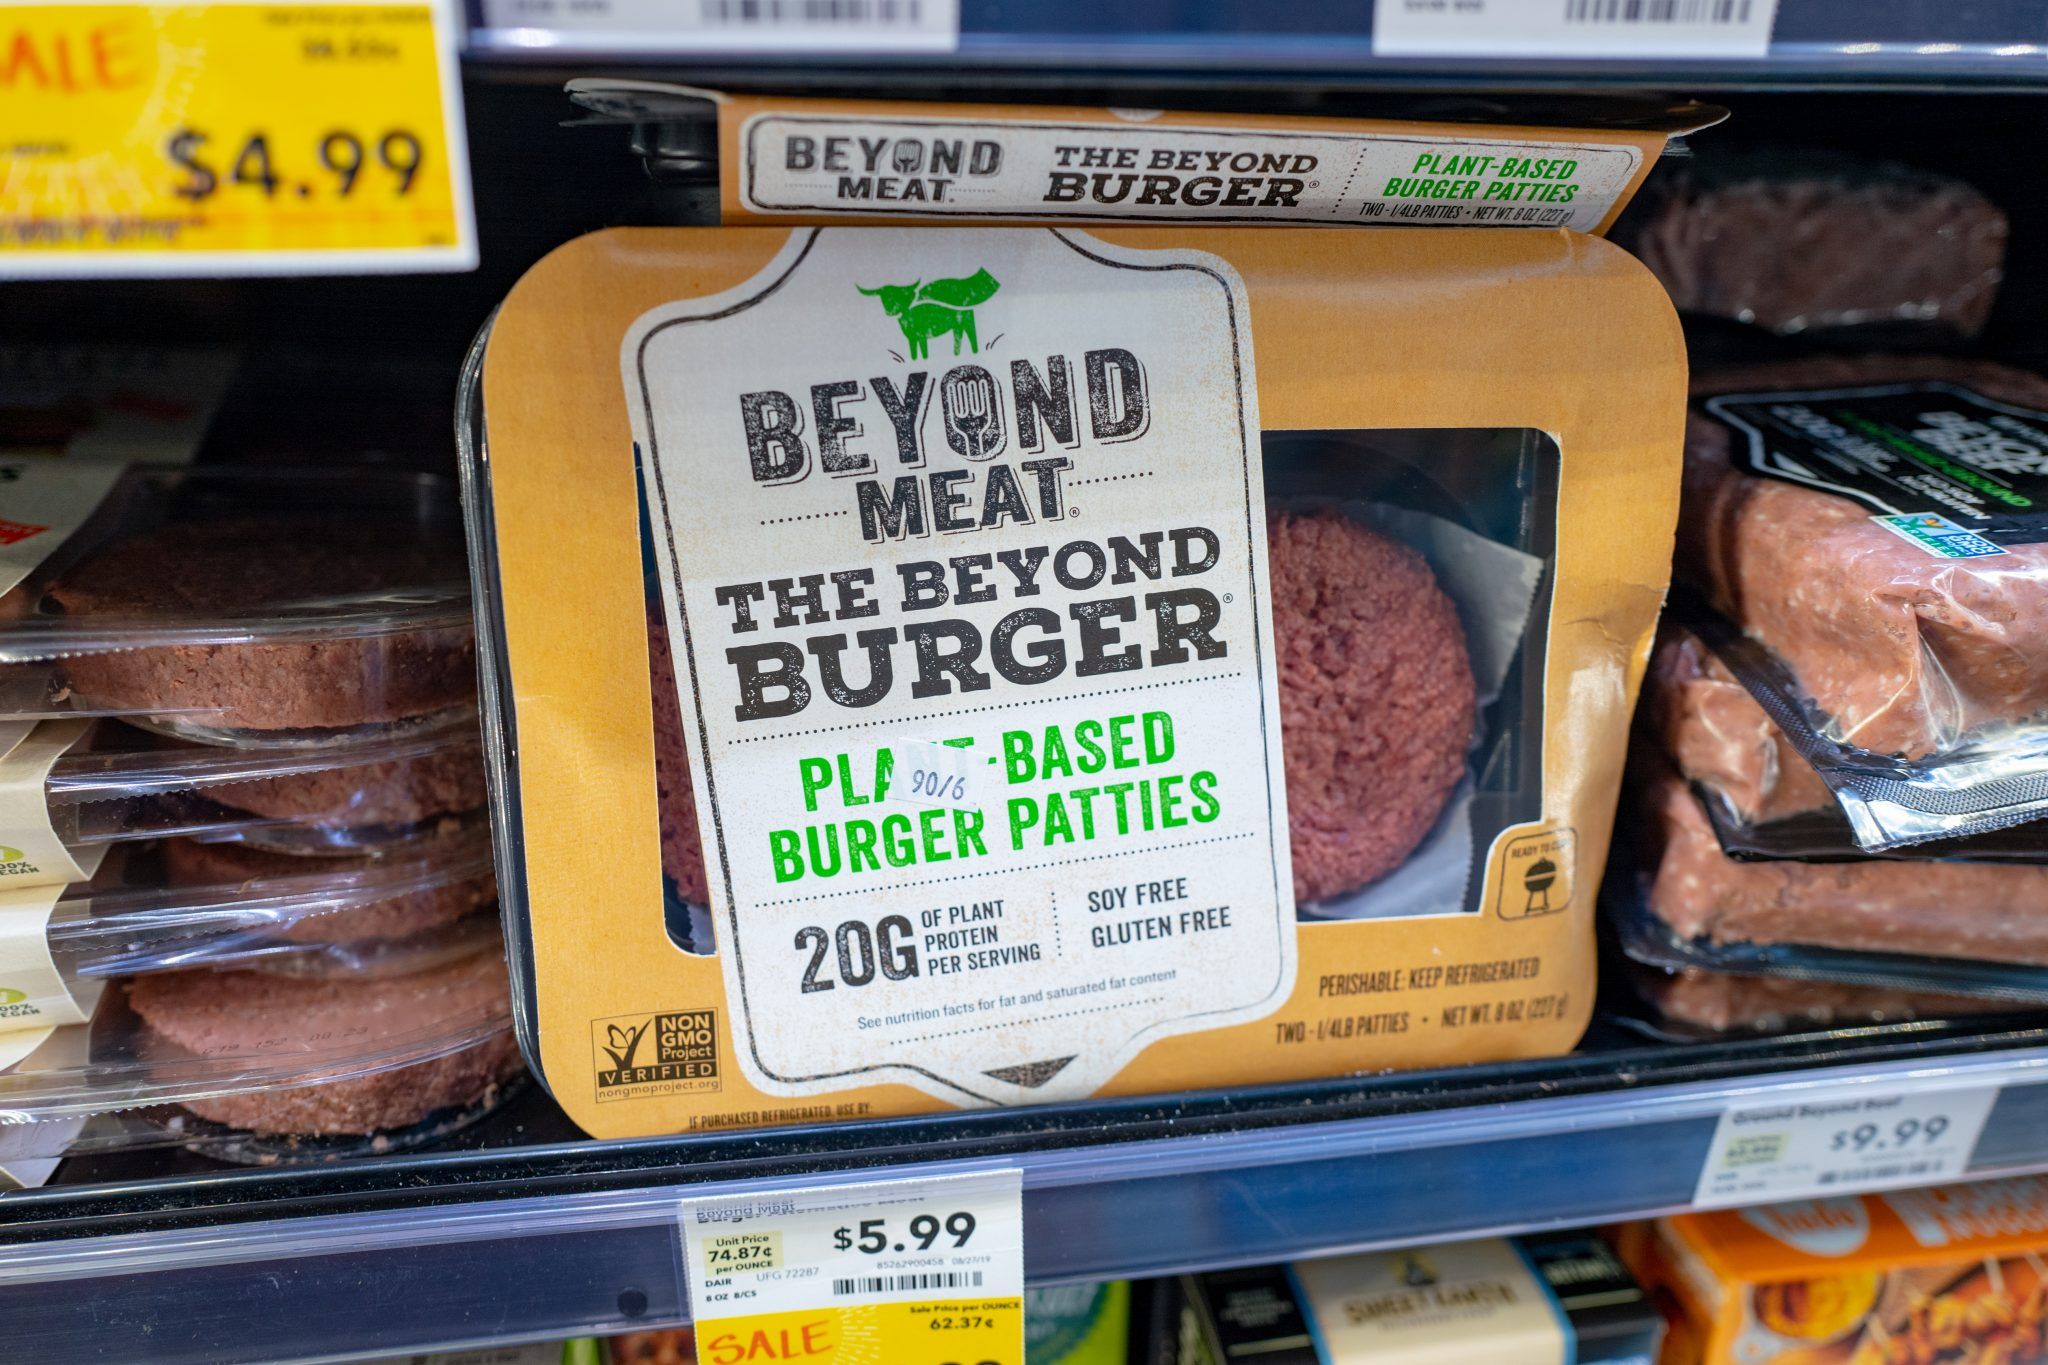 Engineered plant-based burger patties from food company Beyond Meat are visible on shelves among other meat alternatives at a grocery store in San Ramon, California, August 28, 2019. (Photo by Smith Collection/Gado/Getty Images)